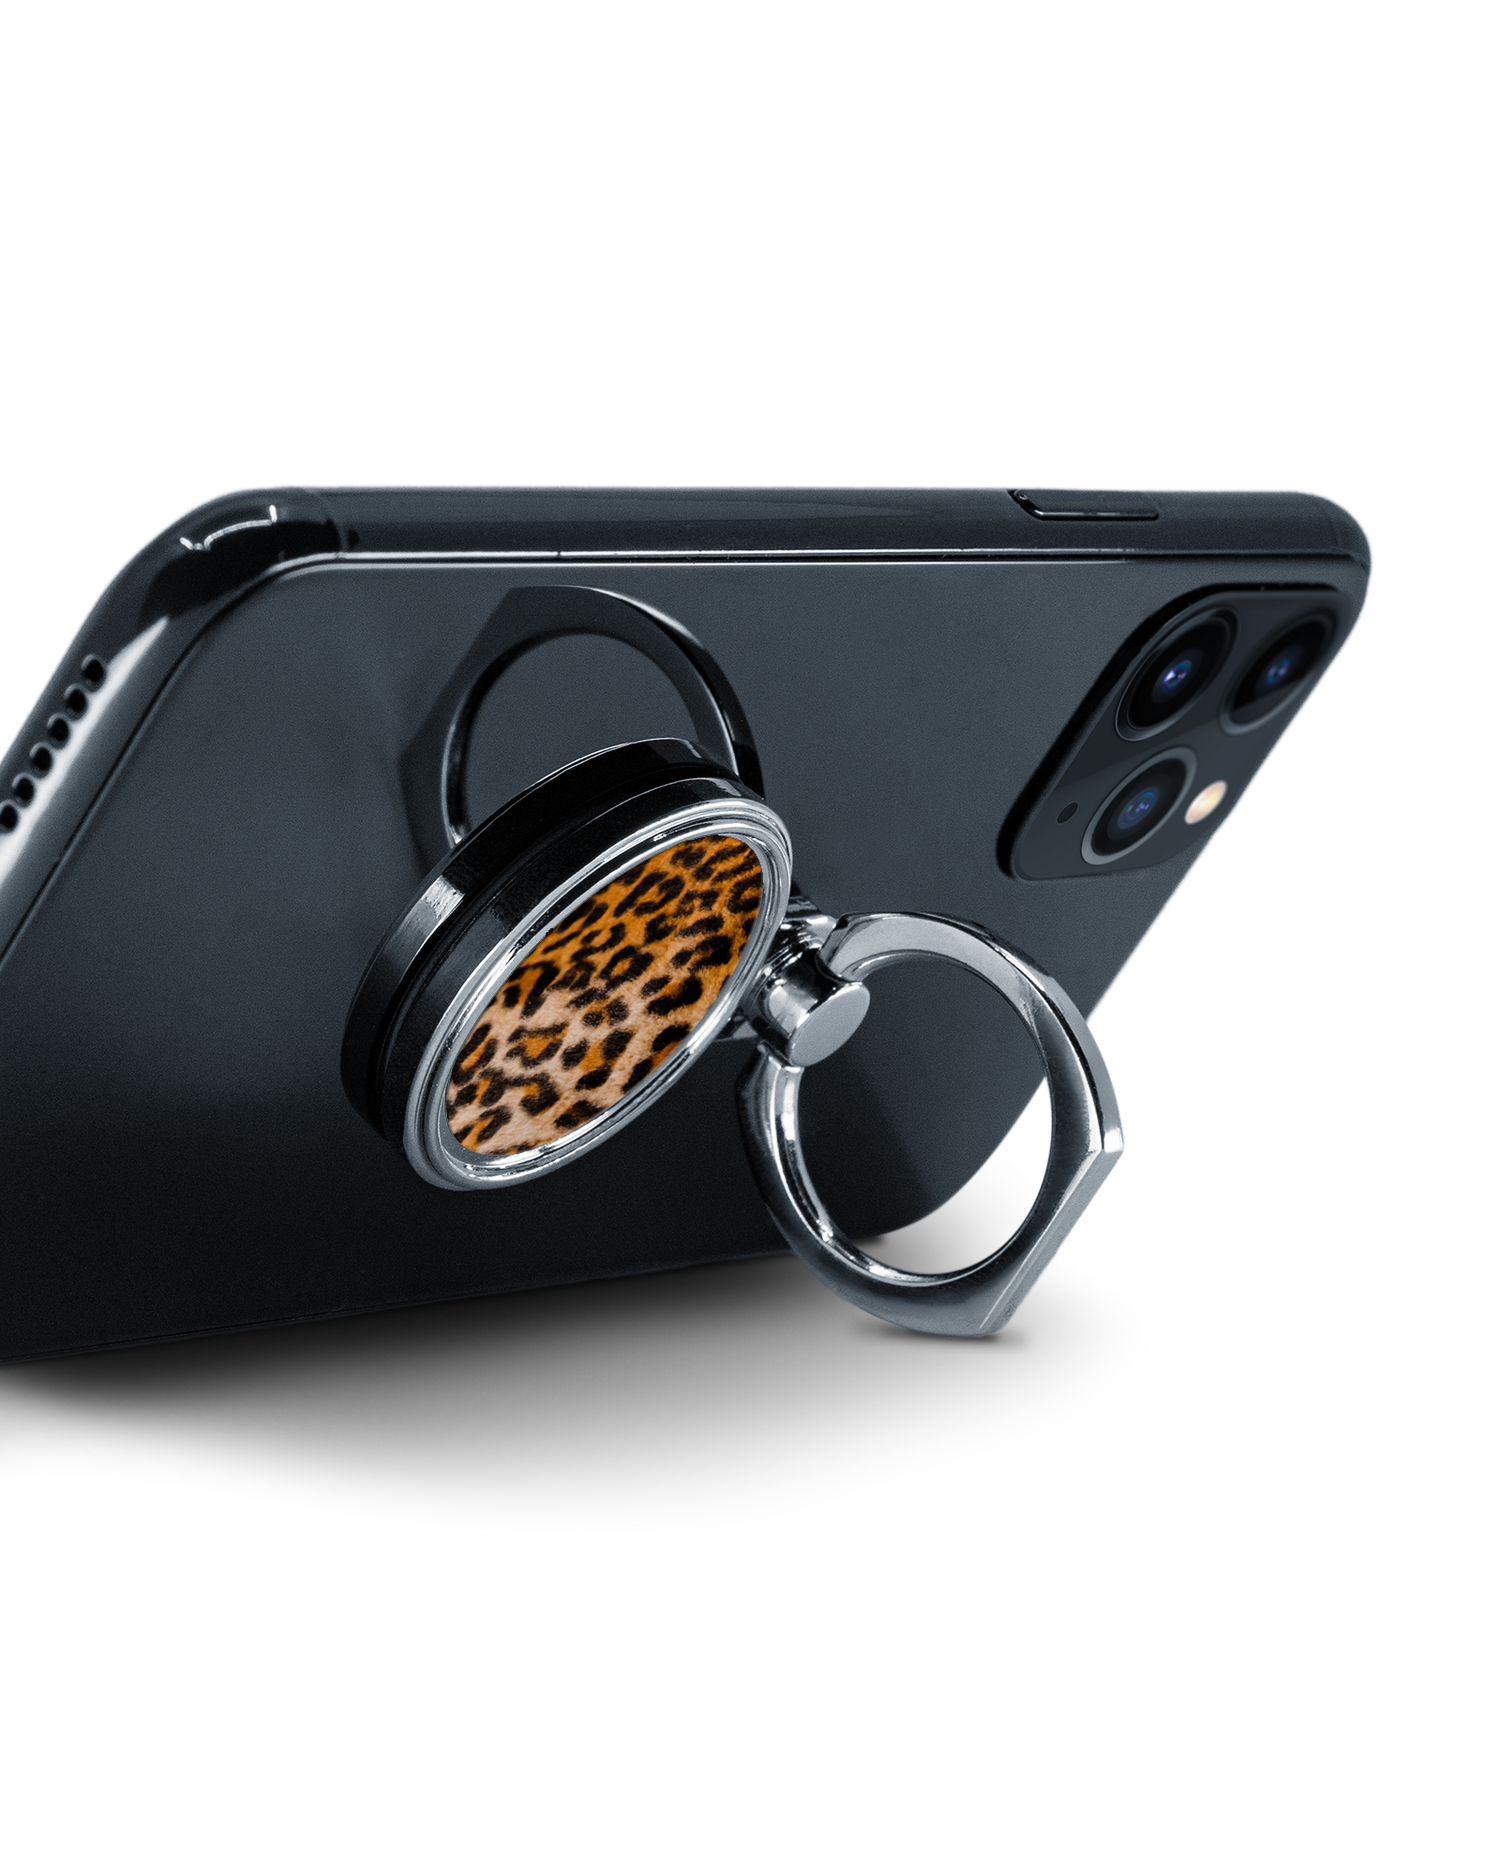 Leopard Pattern Ring Holder attached to a smartphone